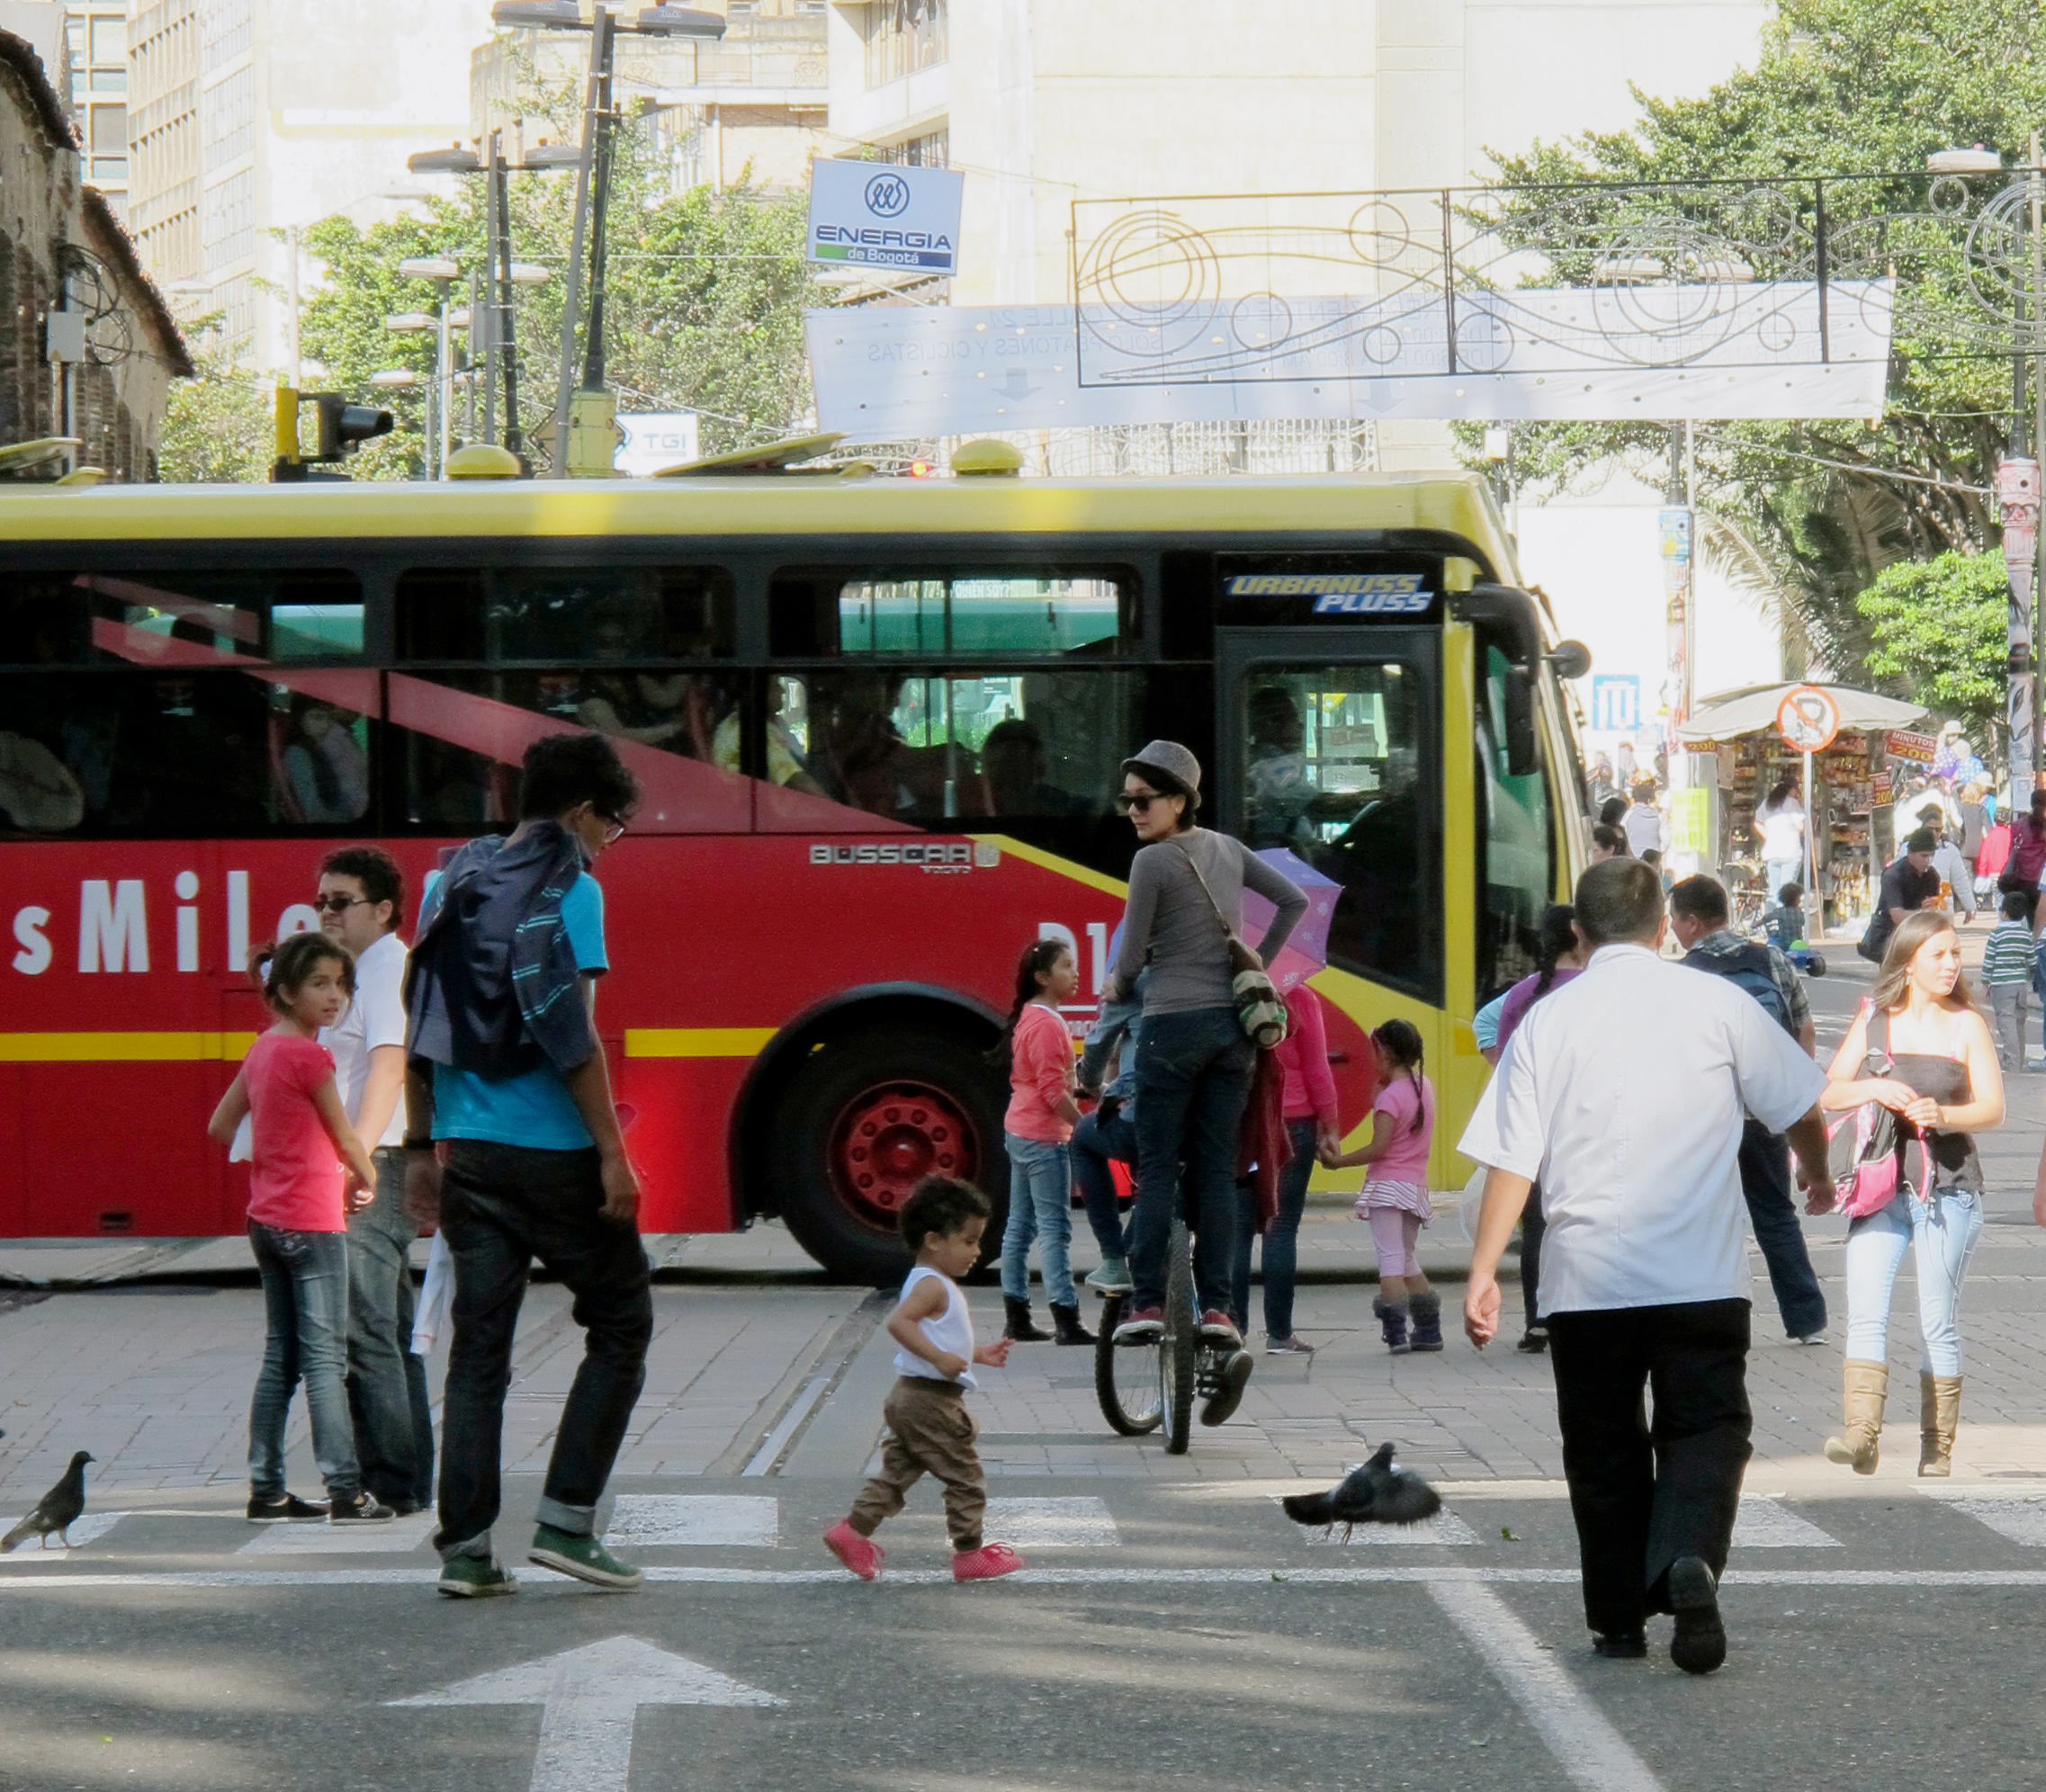 Are our cities fulfilling toddlers, children, and caregivers' mobility demands?